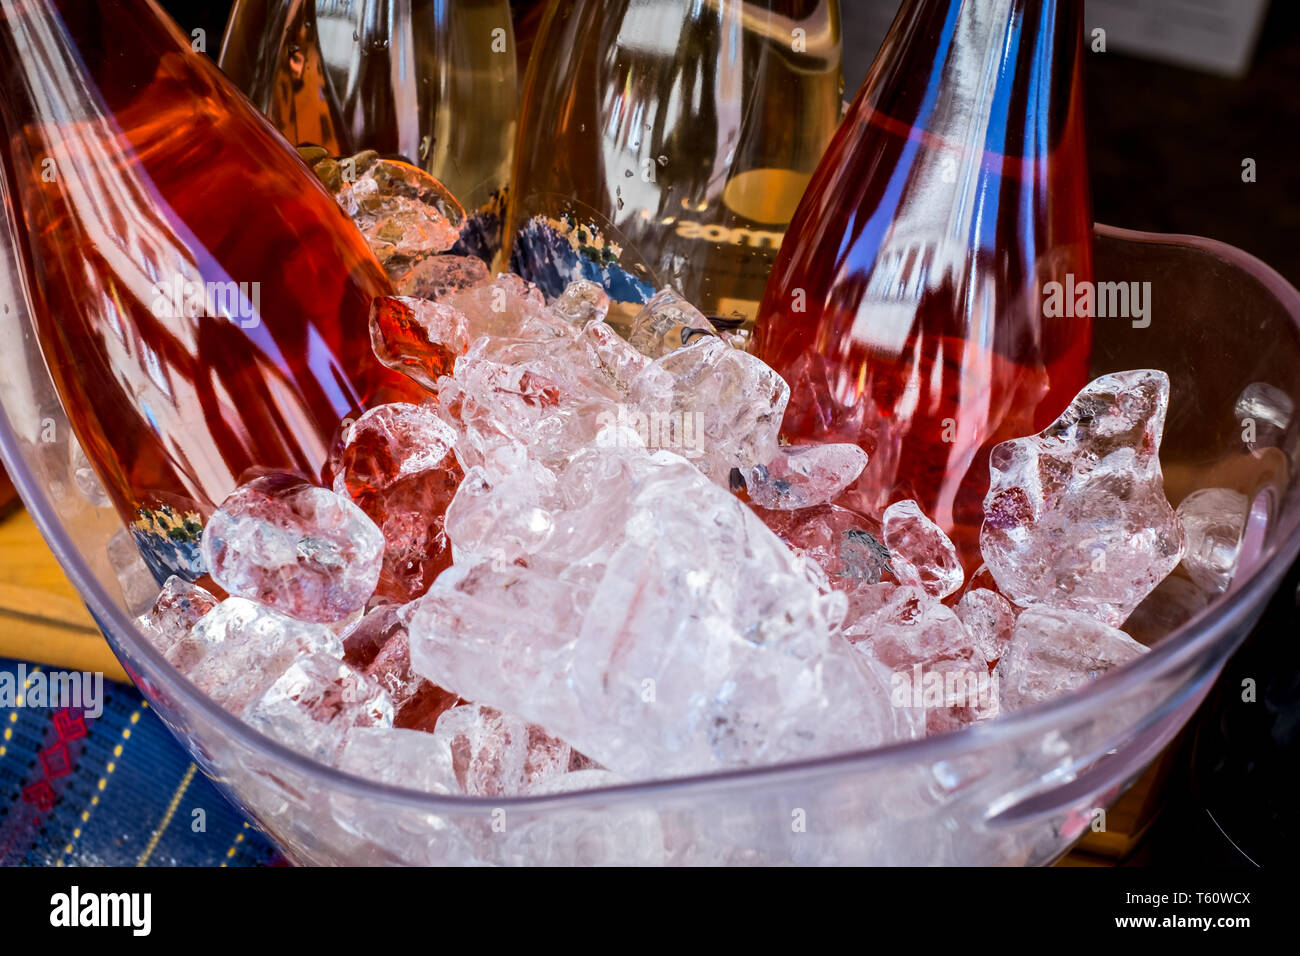 bottles of wine in the ice bowl Stock Photo